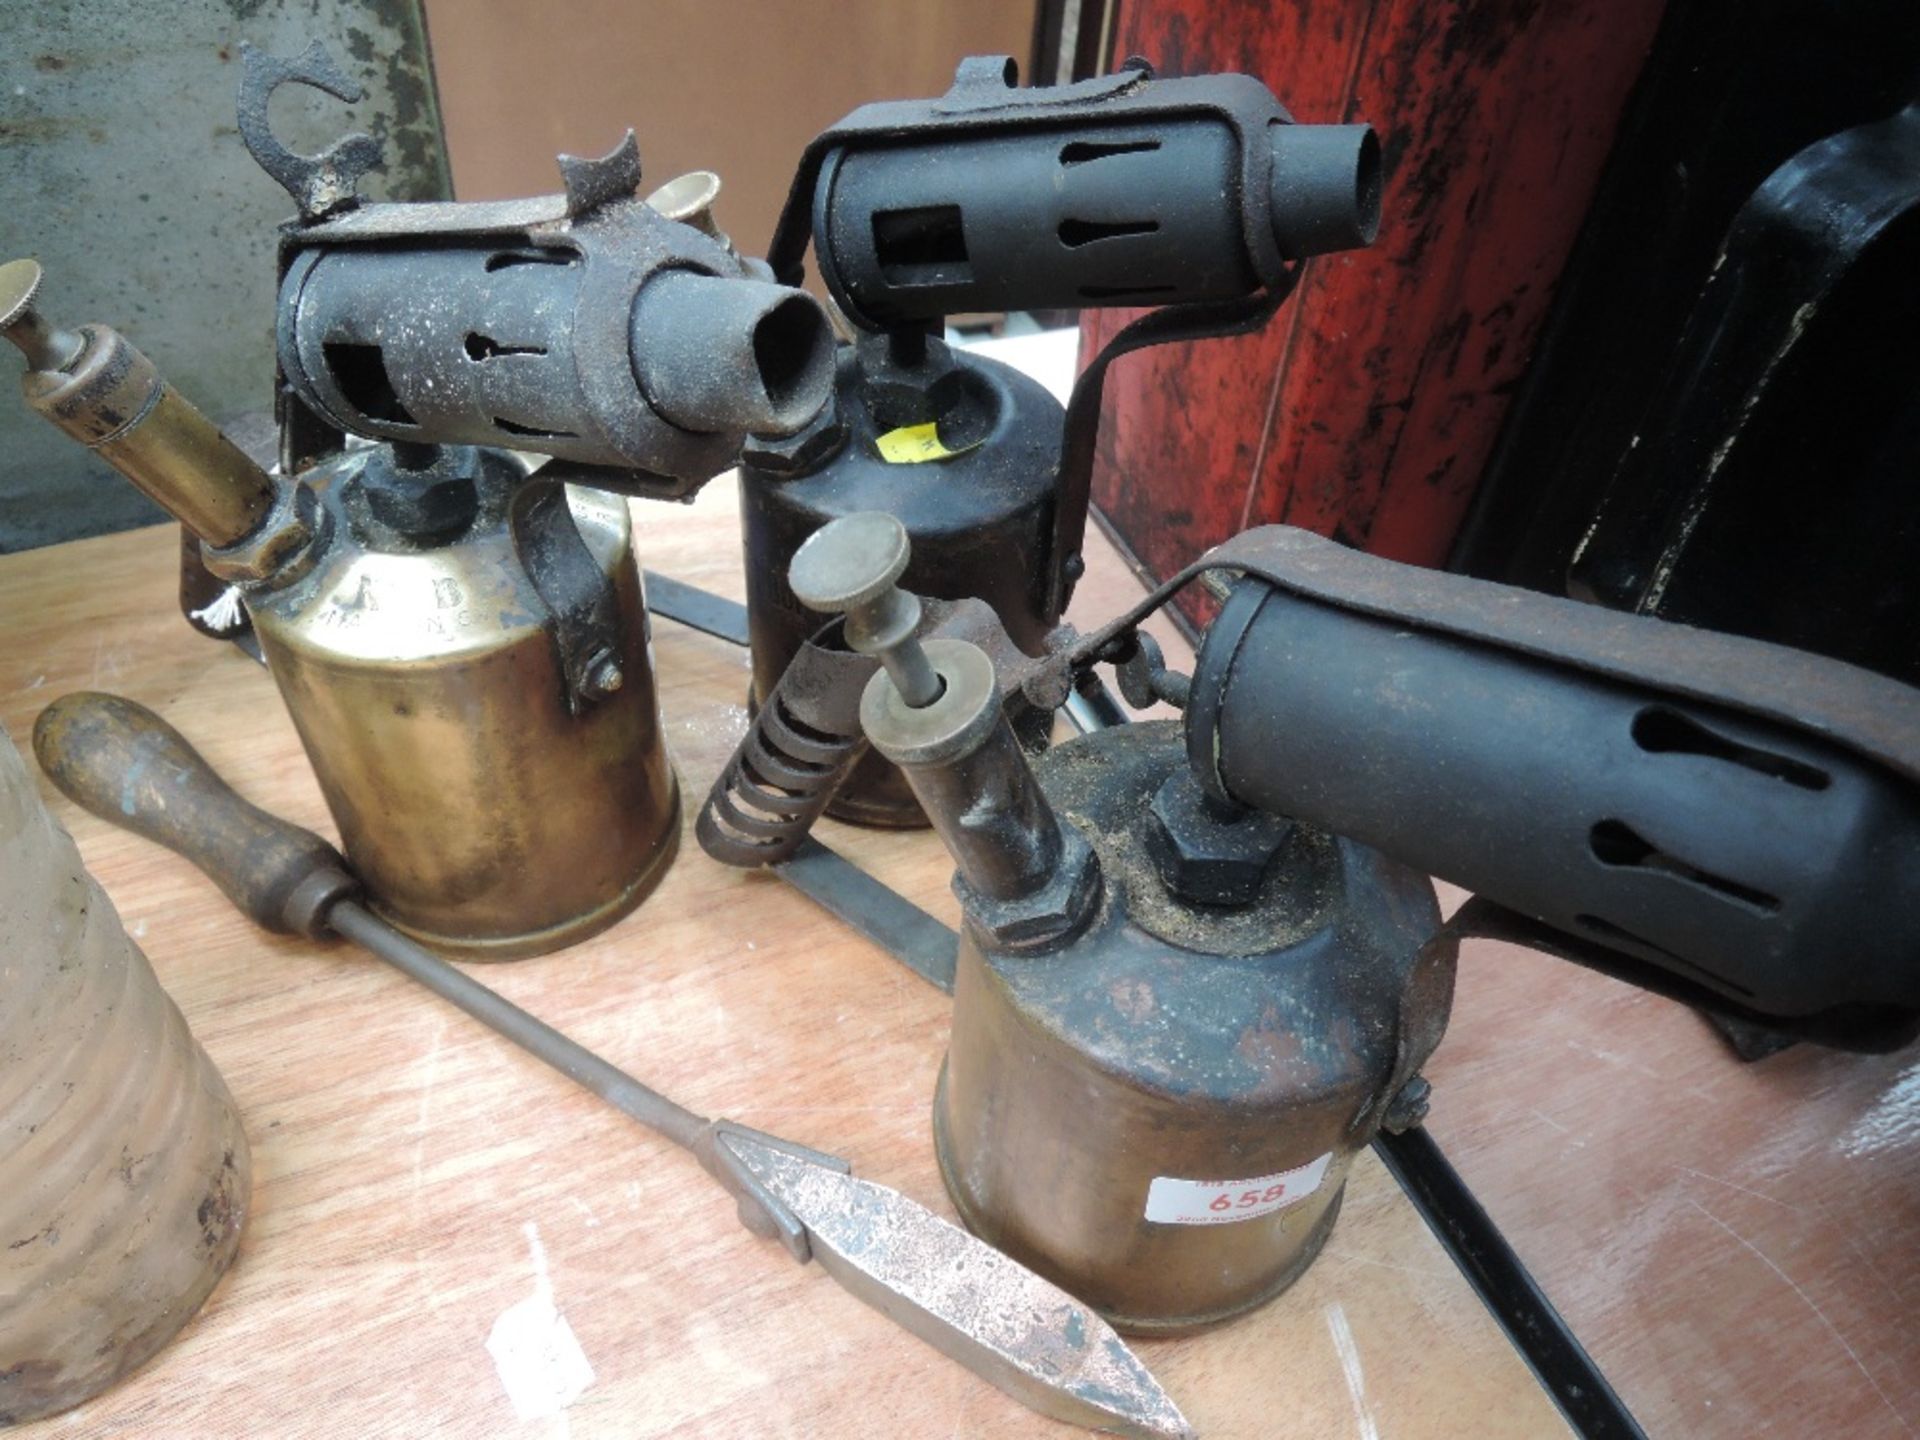 Three brass blow torches and soldering iron.